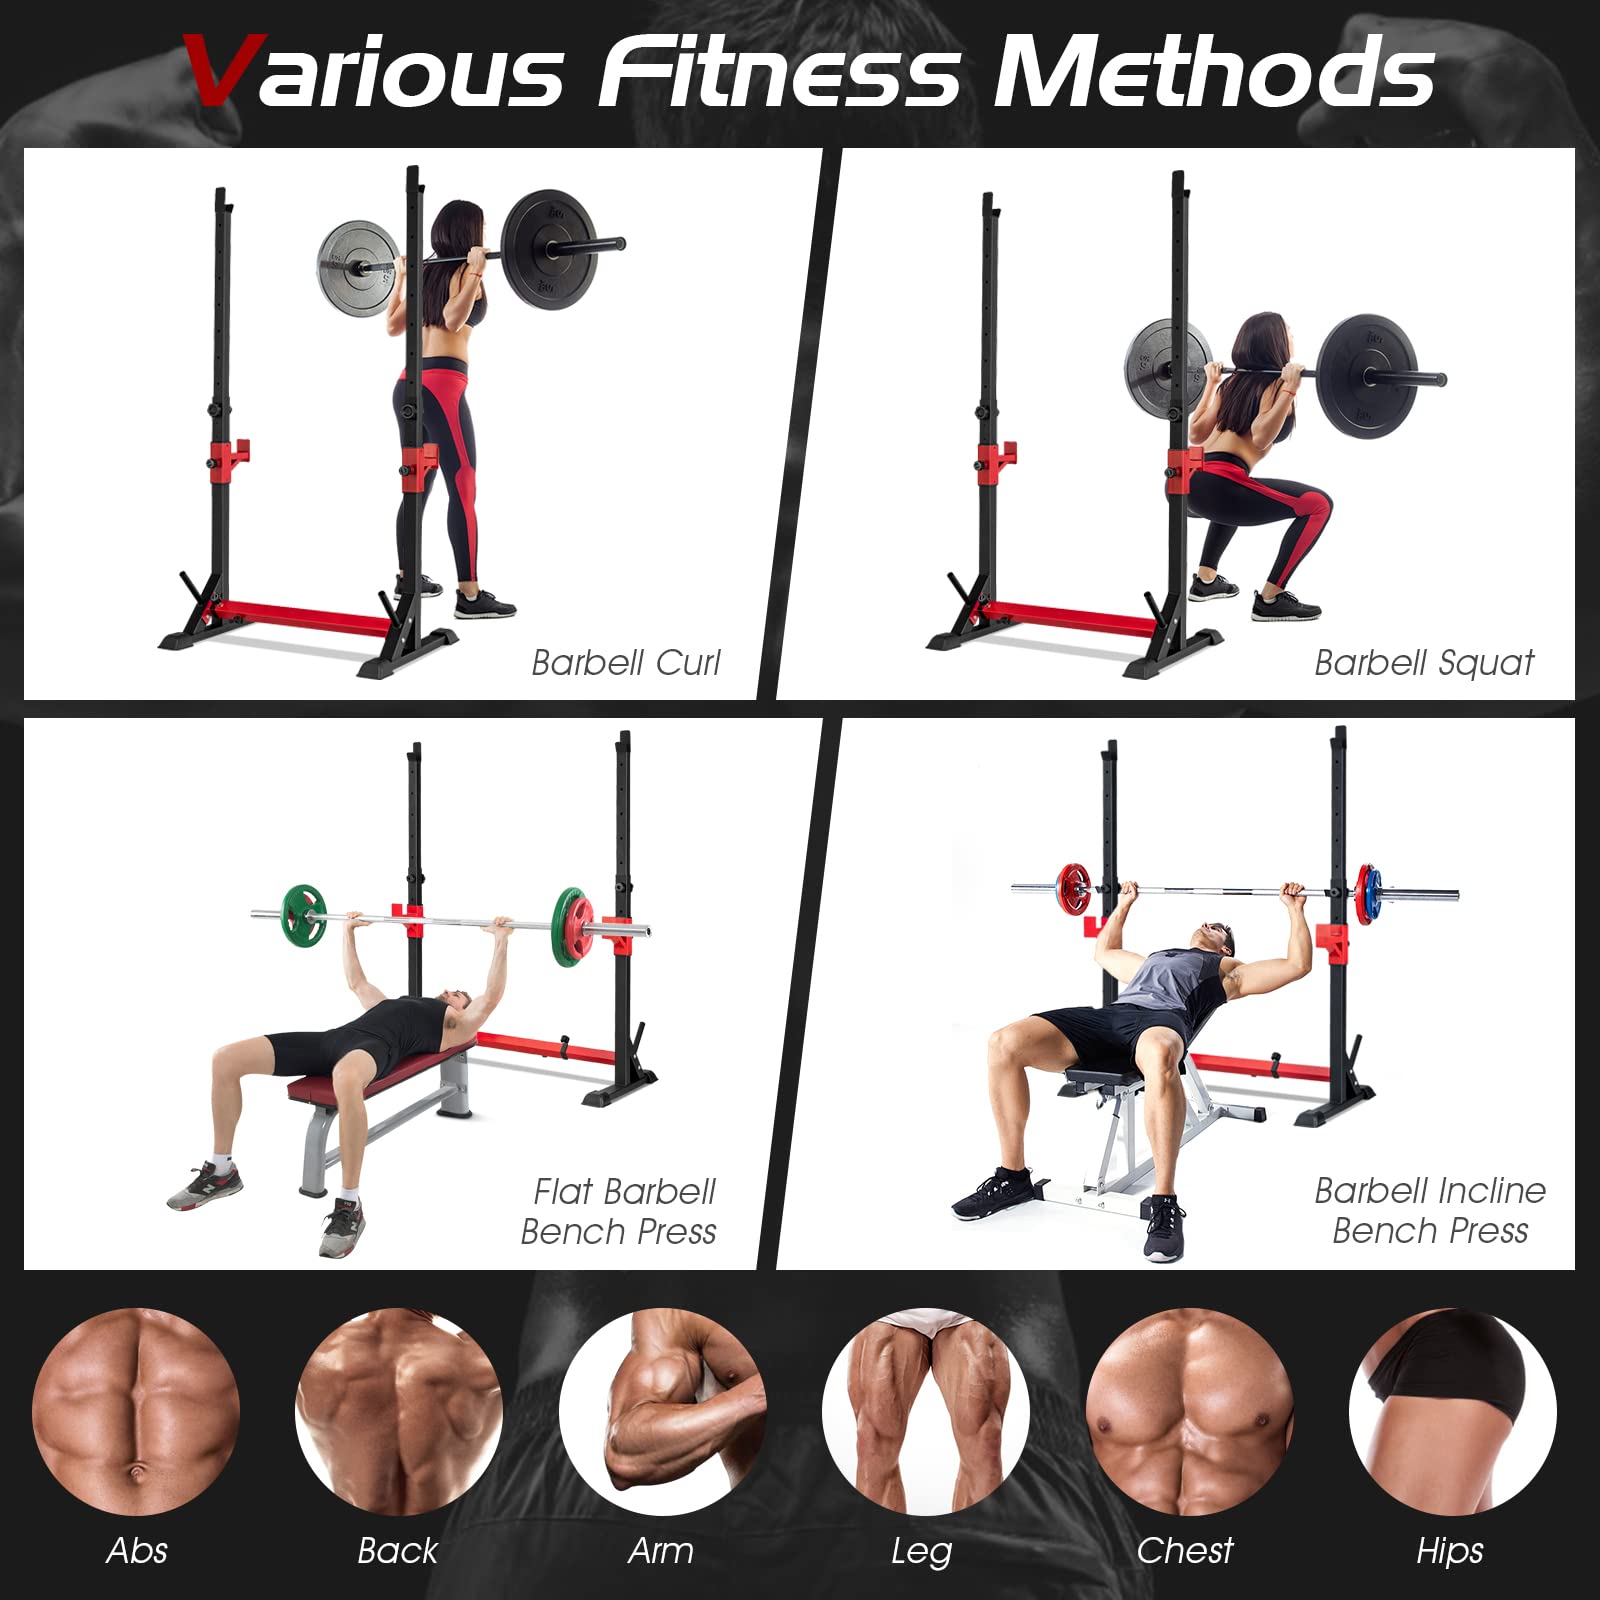 Adjustable Barbell Rack Stand, Multi-function Squat Rack Dip Station w/ Weight Plates Storage